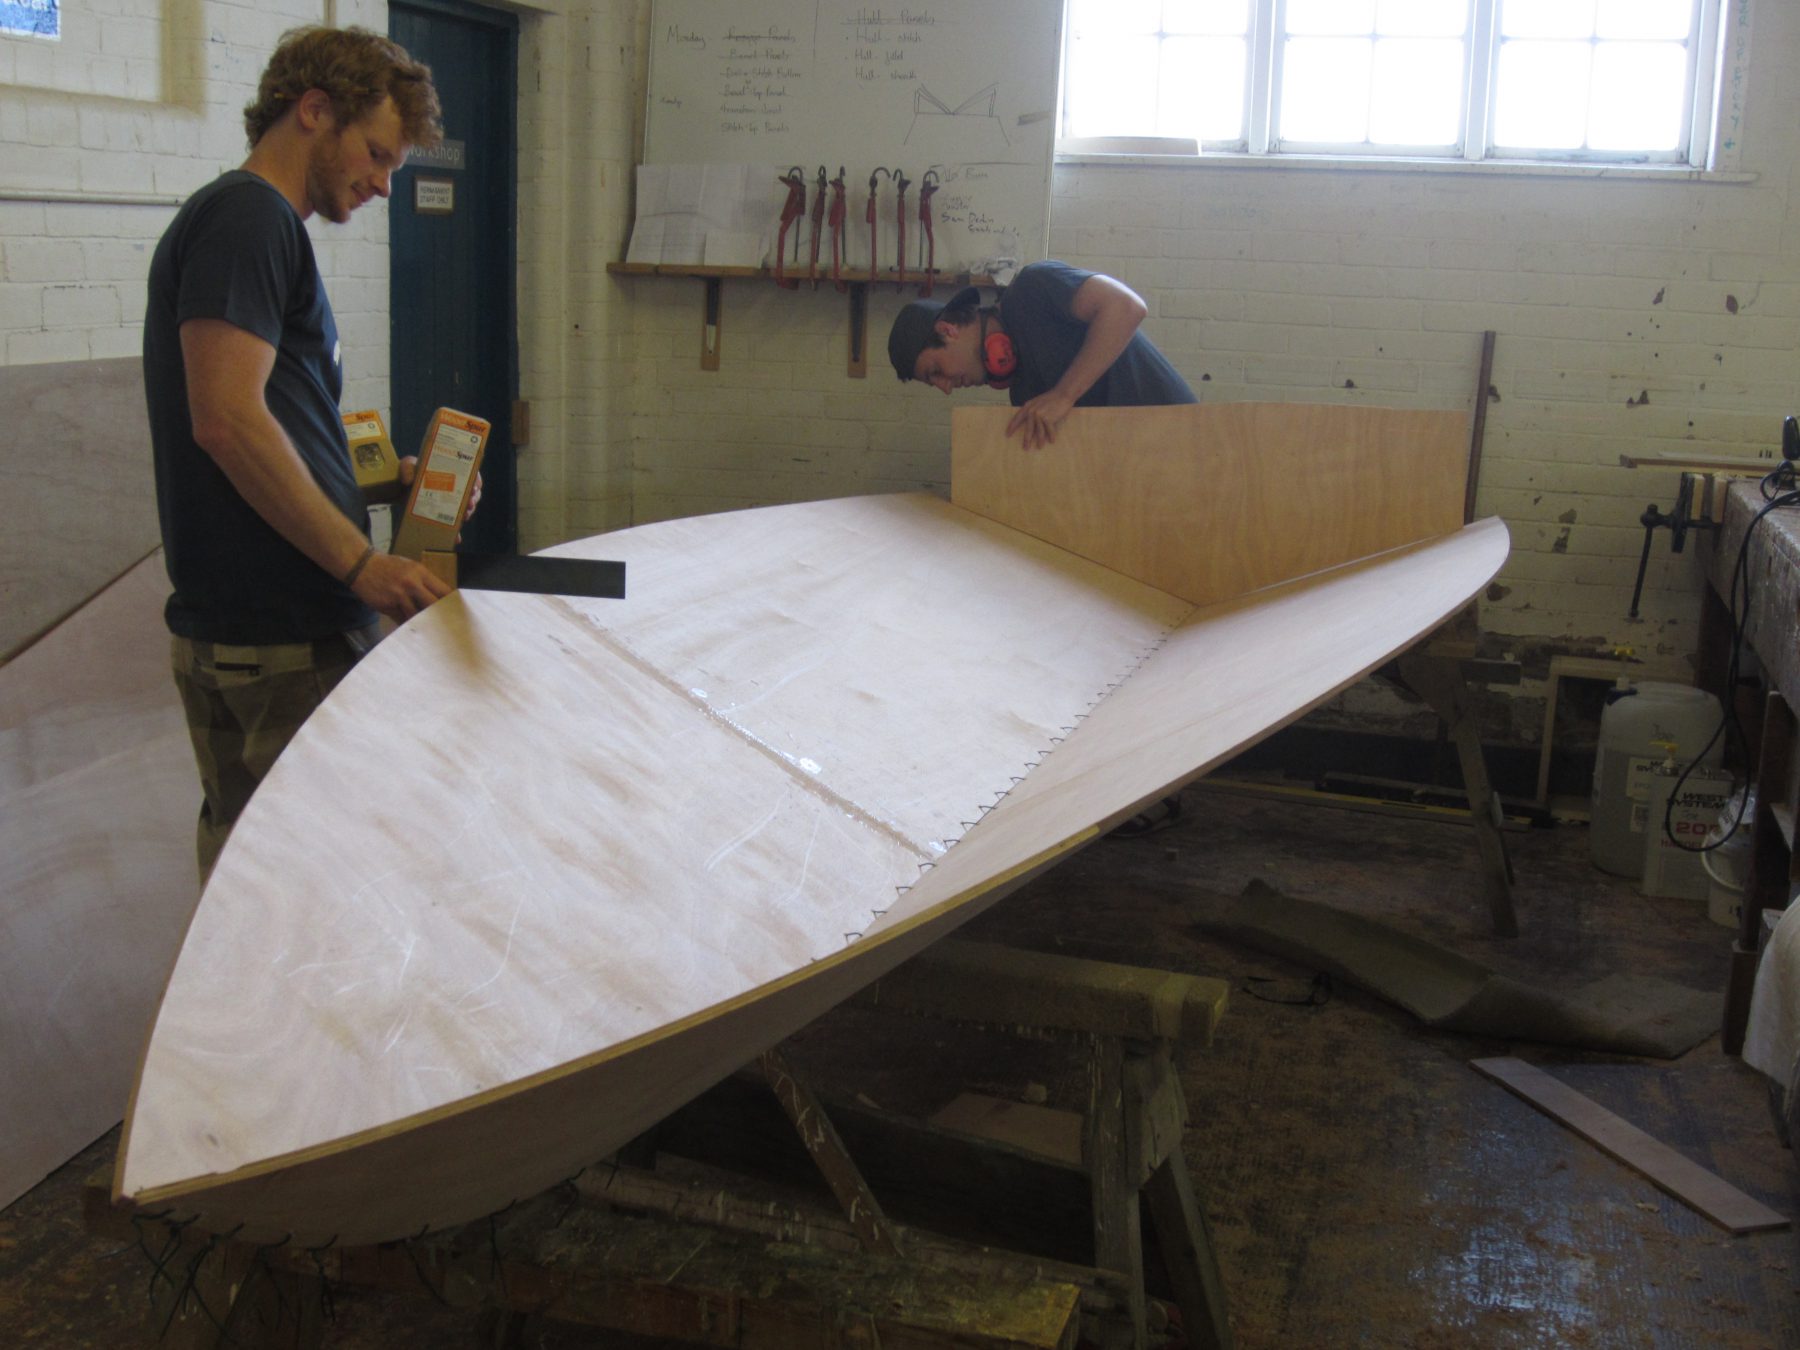 Building the dream boat with epoxy – by Joe Latimer and Alex Lyddon